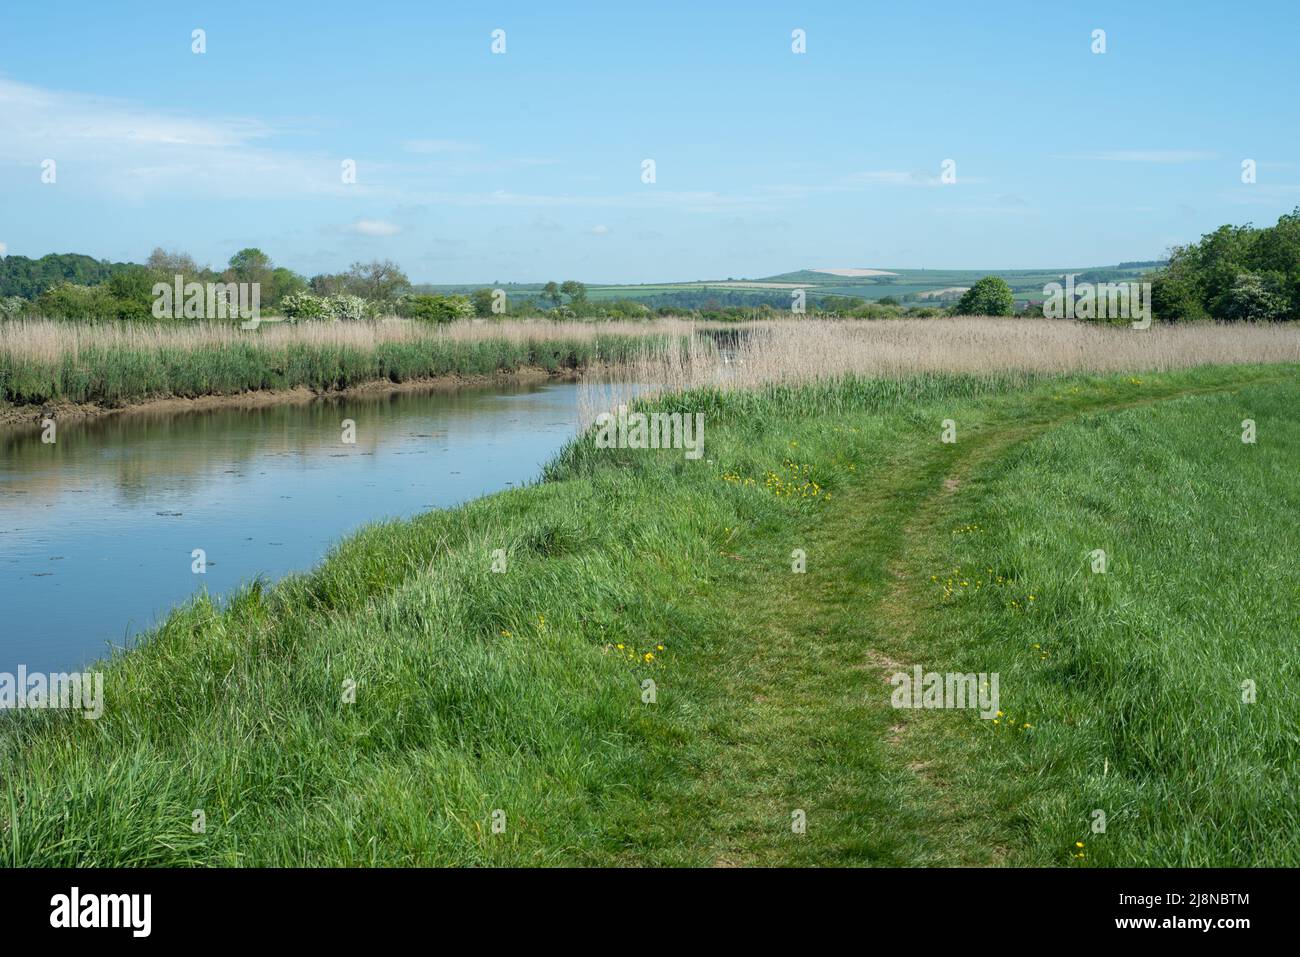 Beautiful picturesque scenery of a path leading around the River Arun in West Sussex, England. Part of the South Downs scenic area. Stock Photo